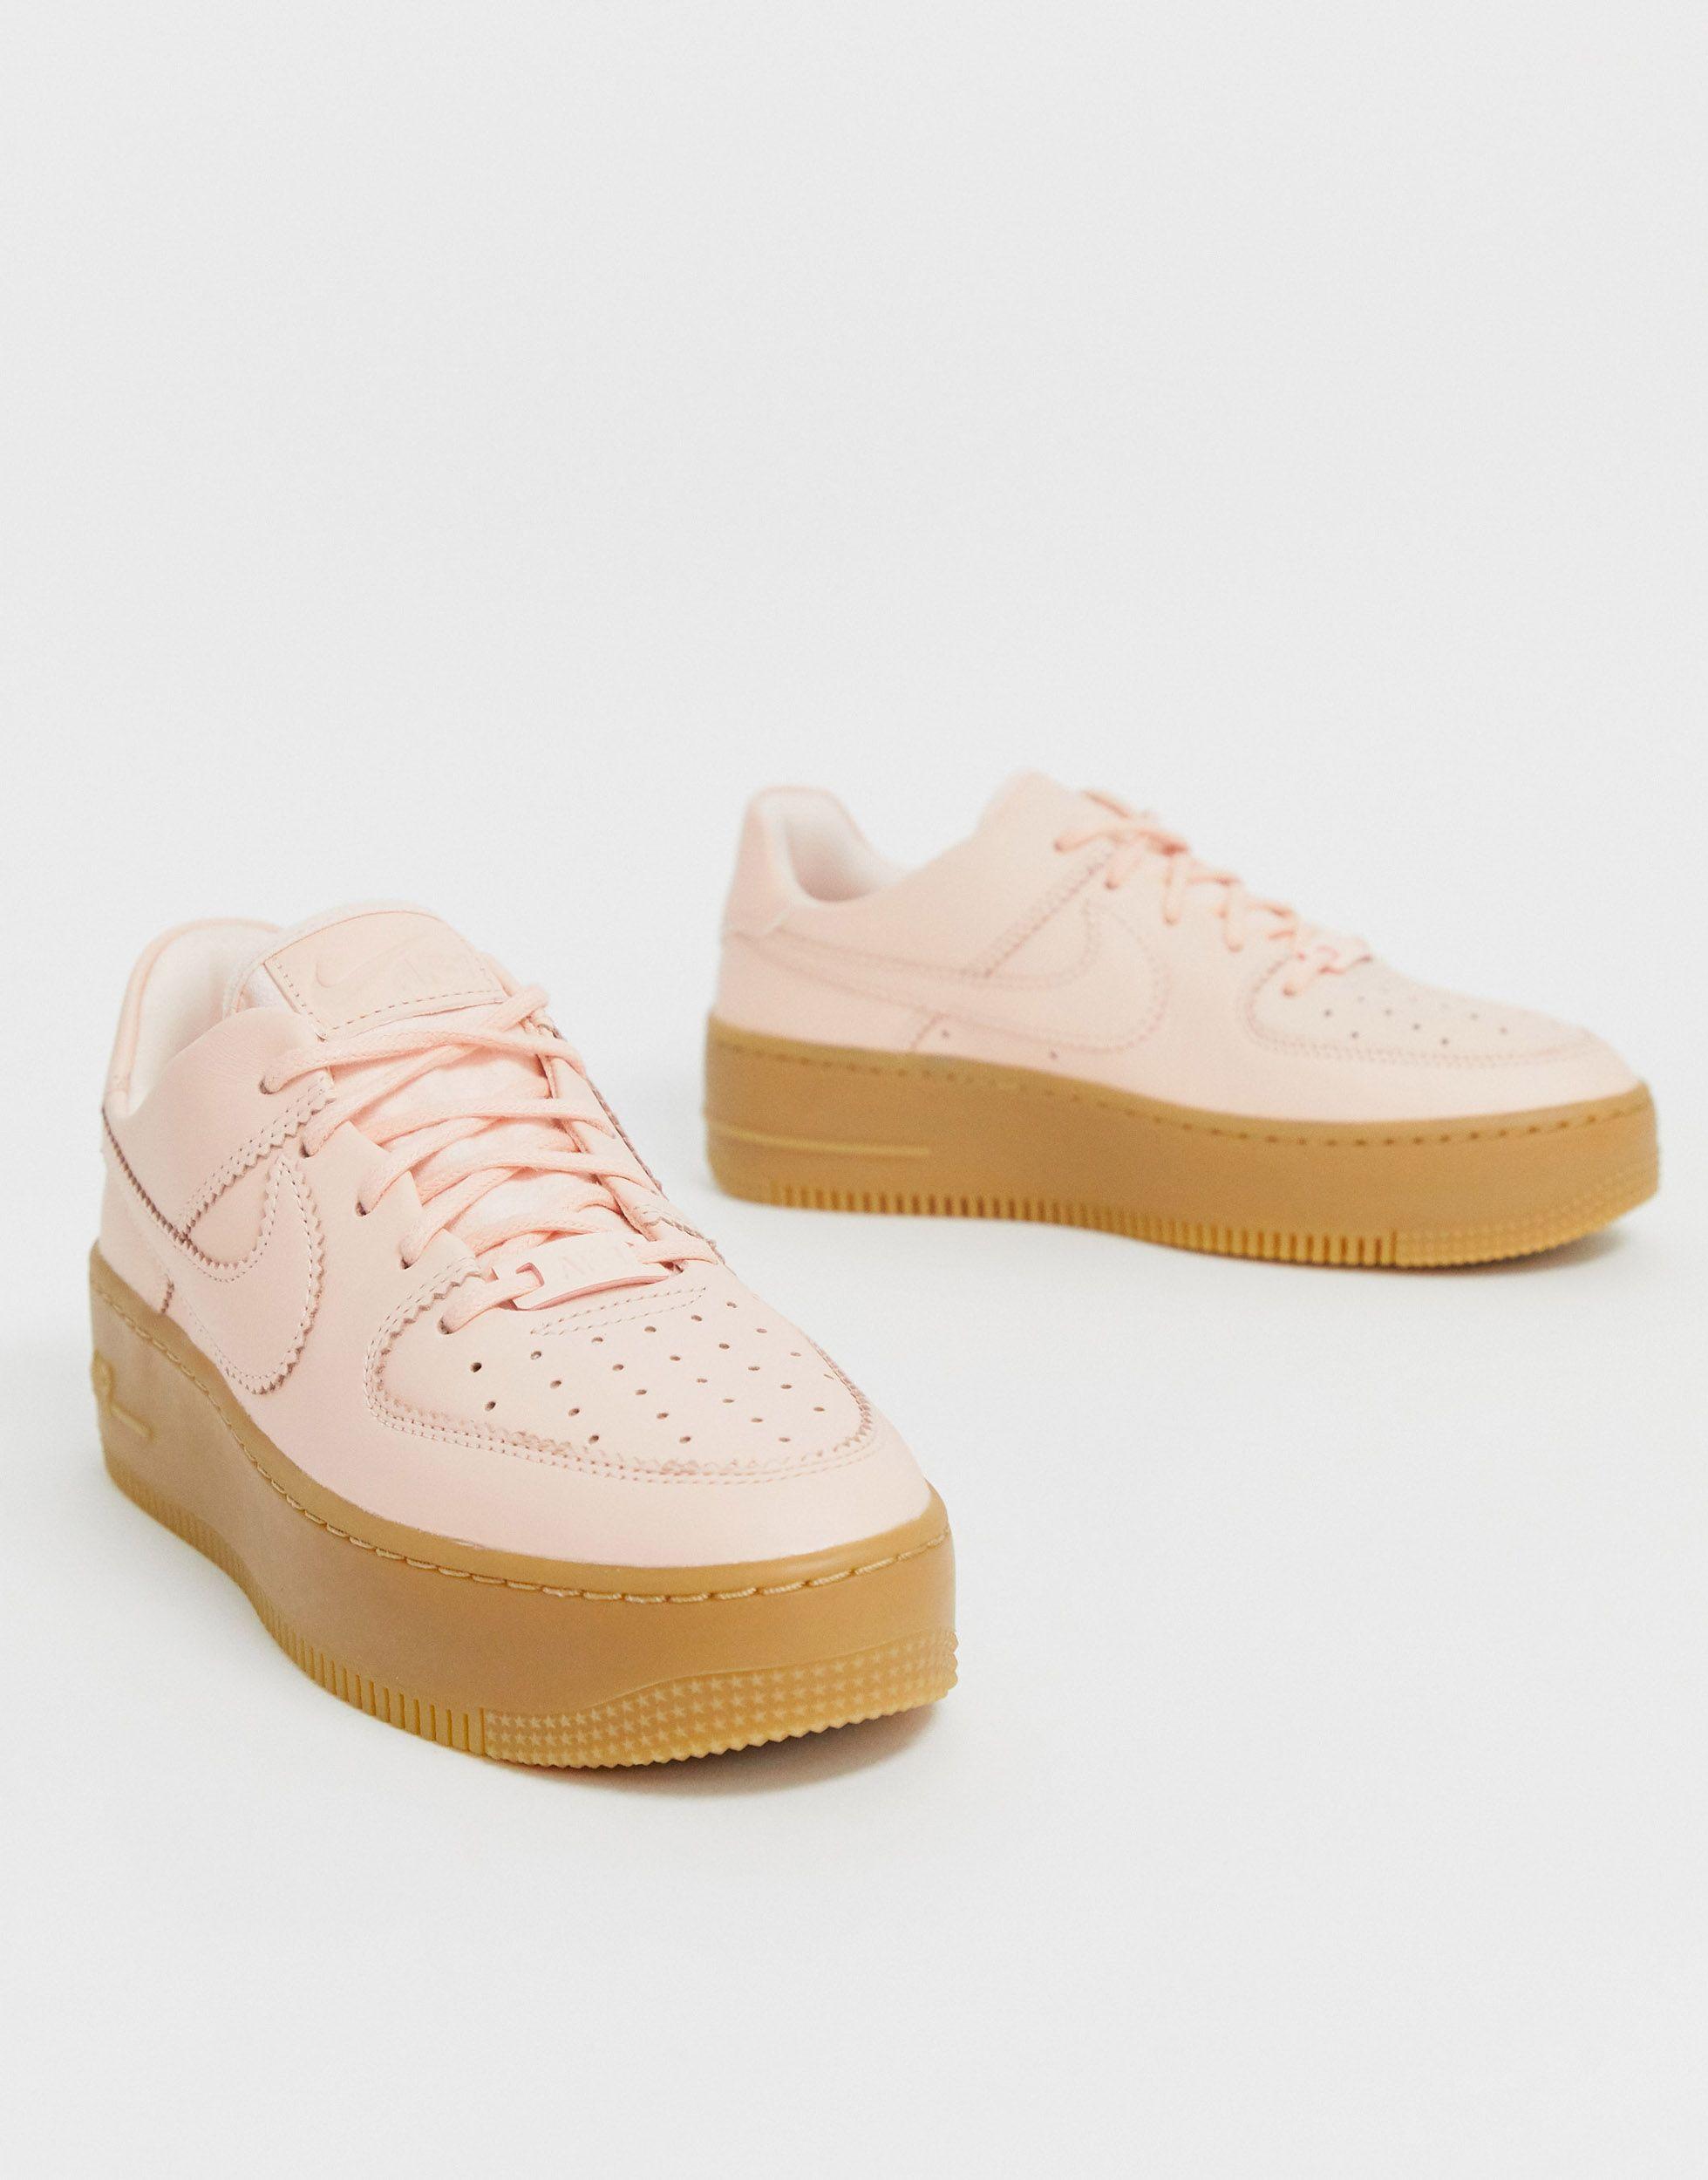 Nike Pale Gum Sole Air Force 1 Sage Low Trainers in Pink | Lyst